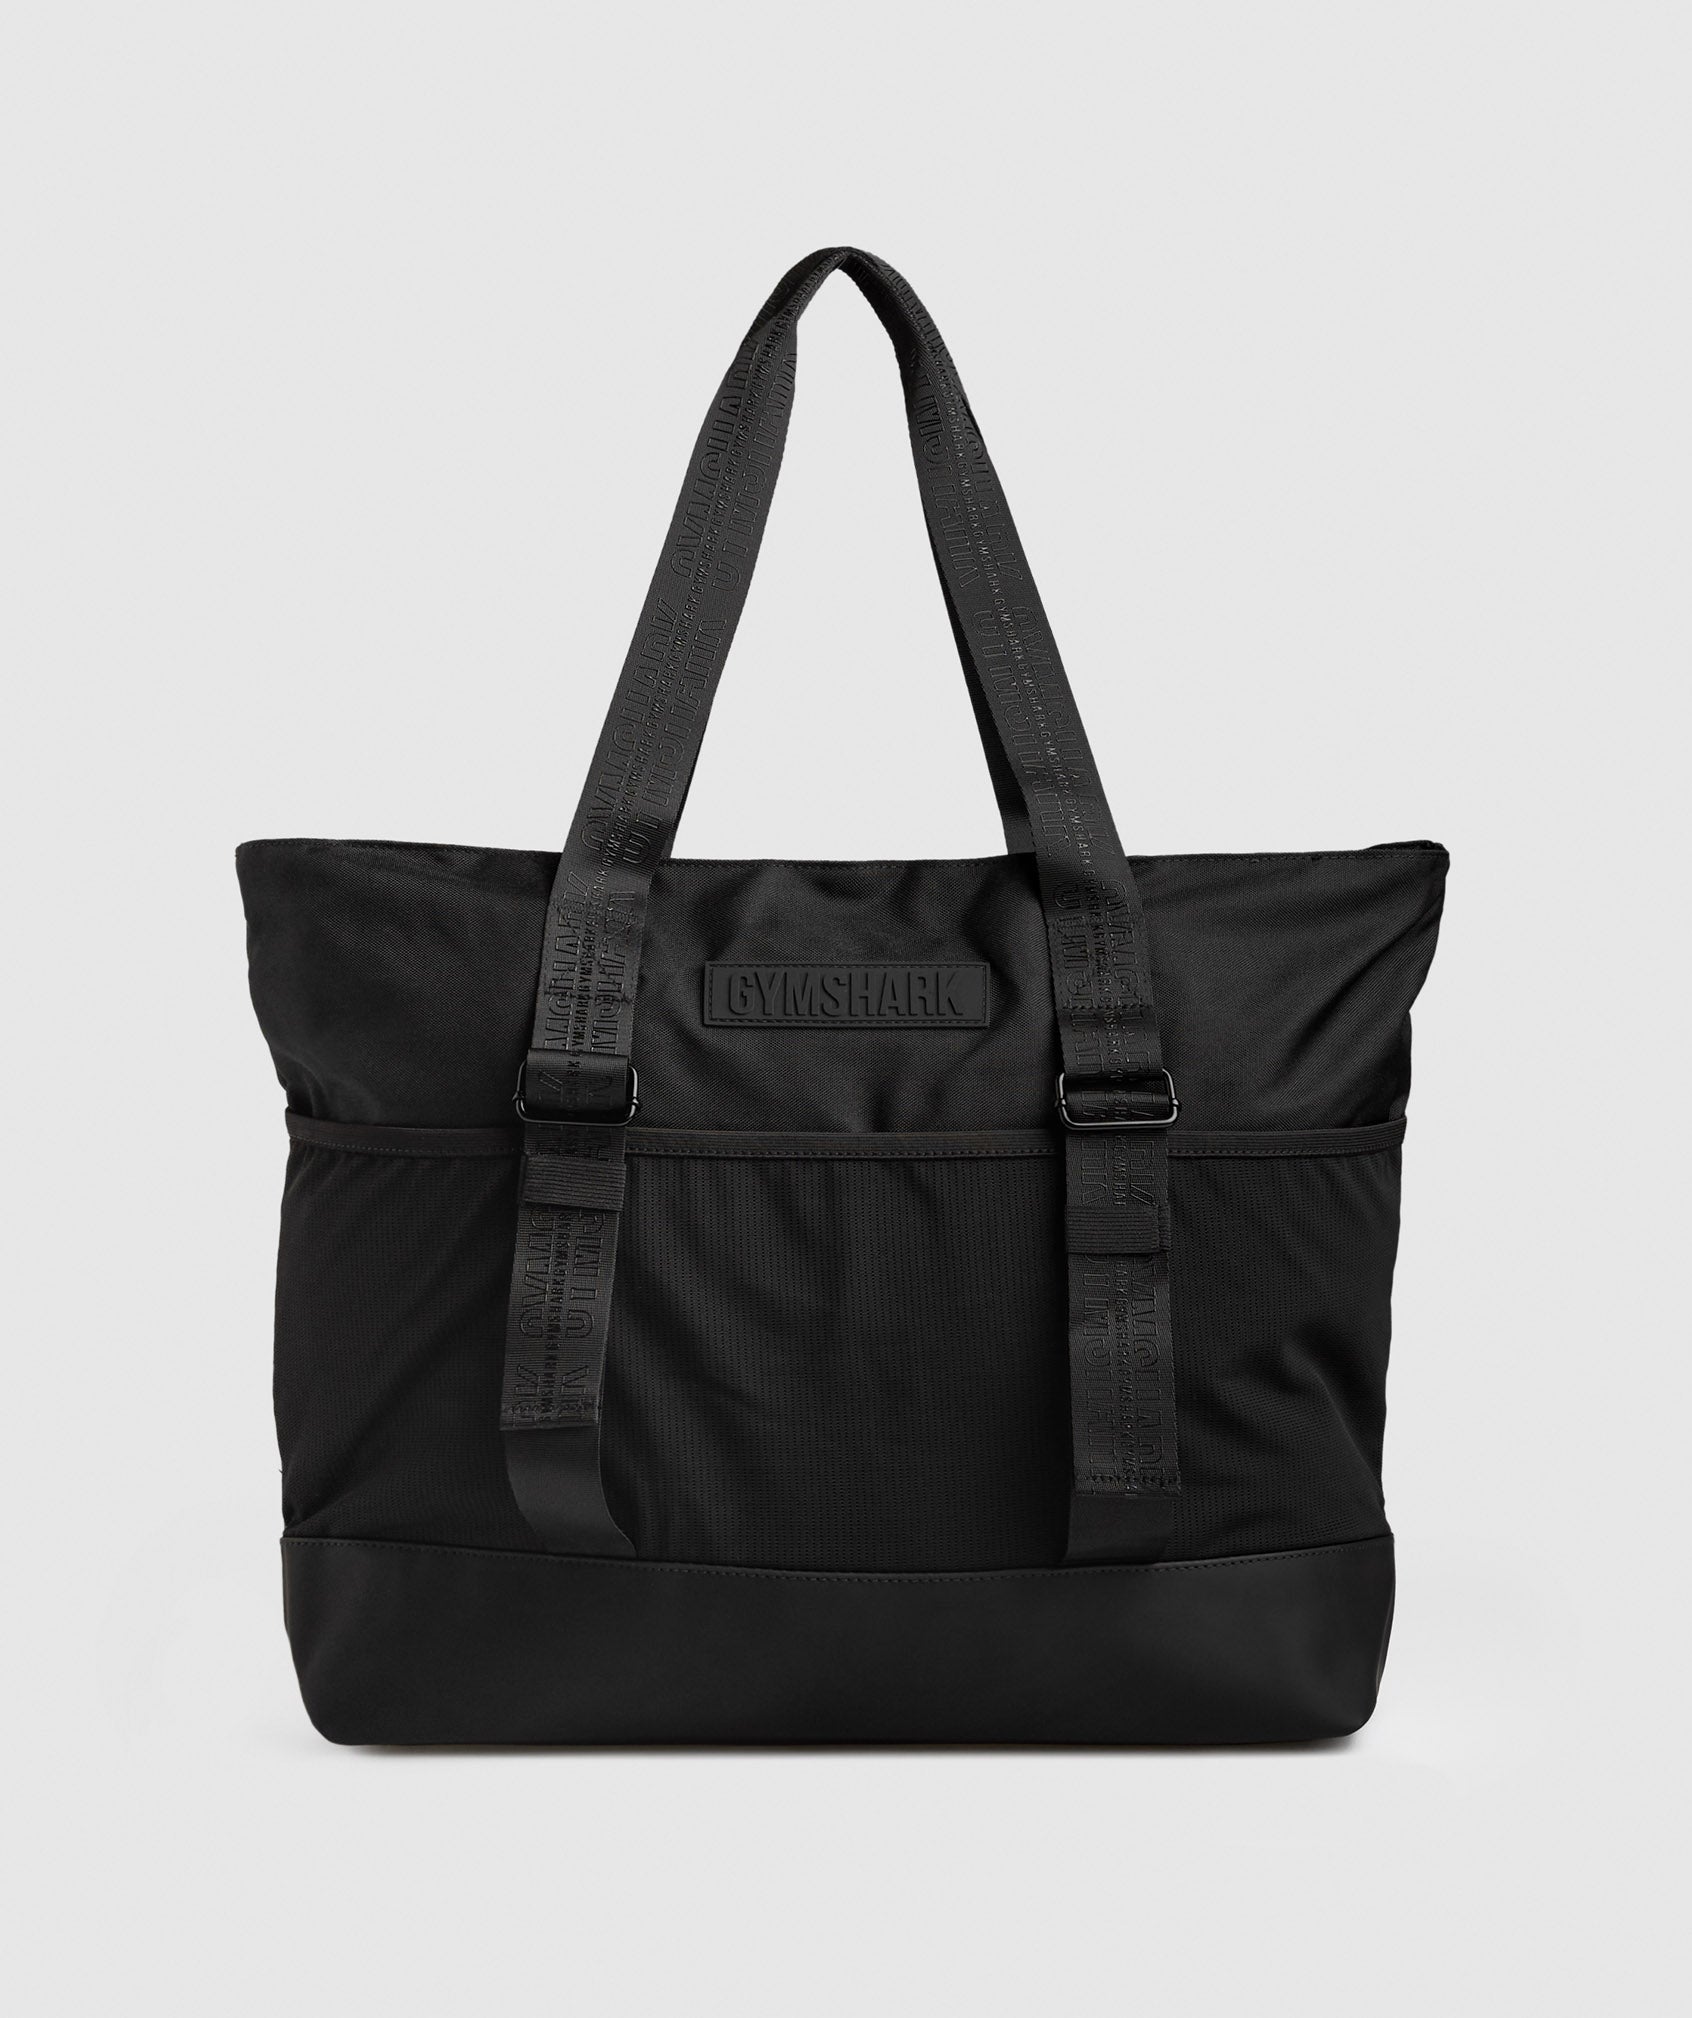 Everyday Tote in Black - view 1